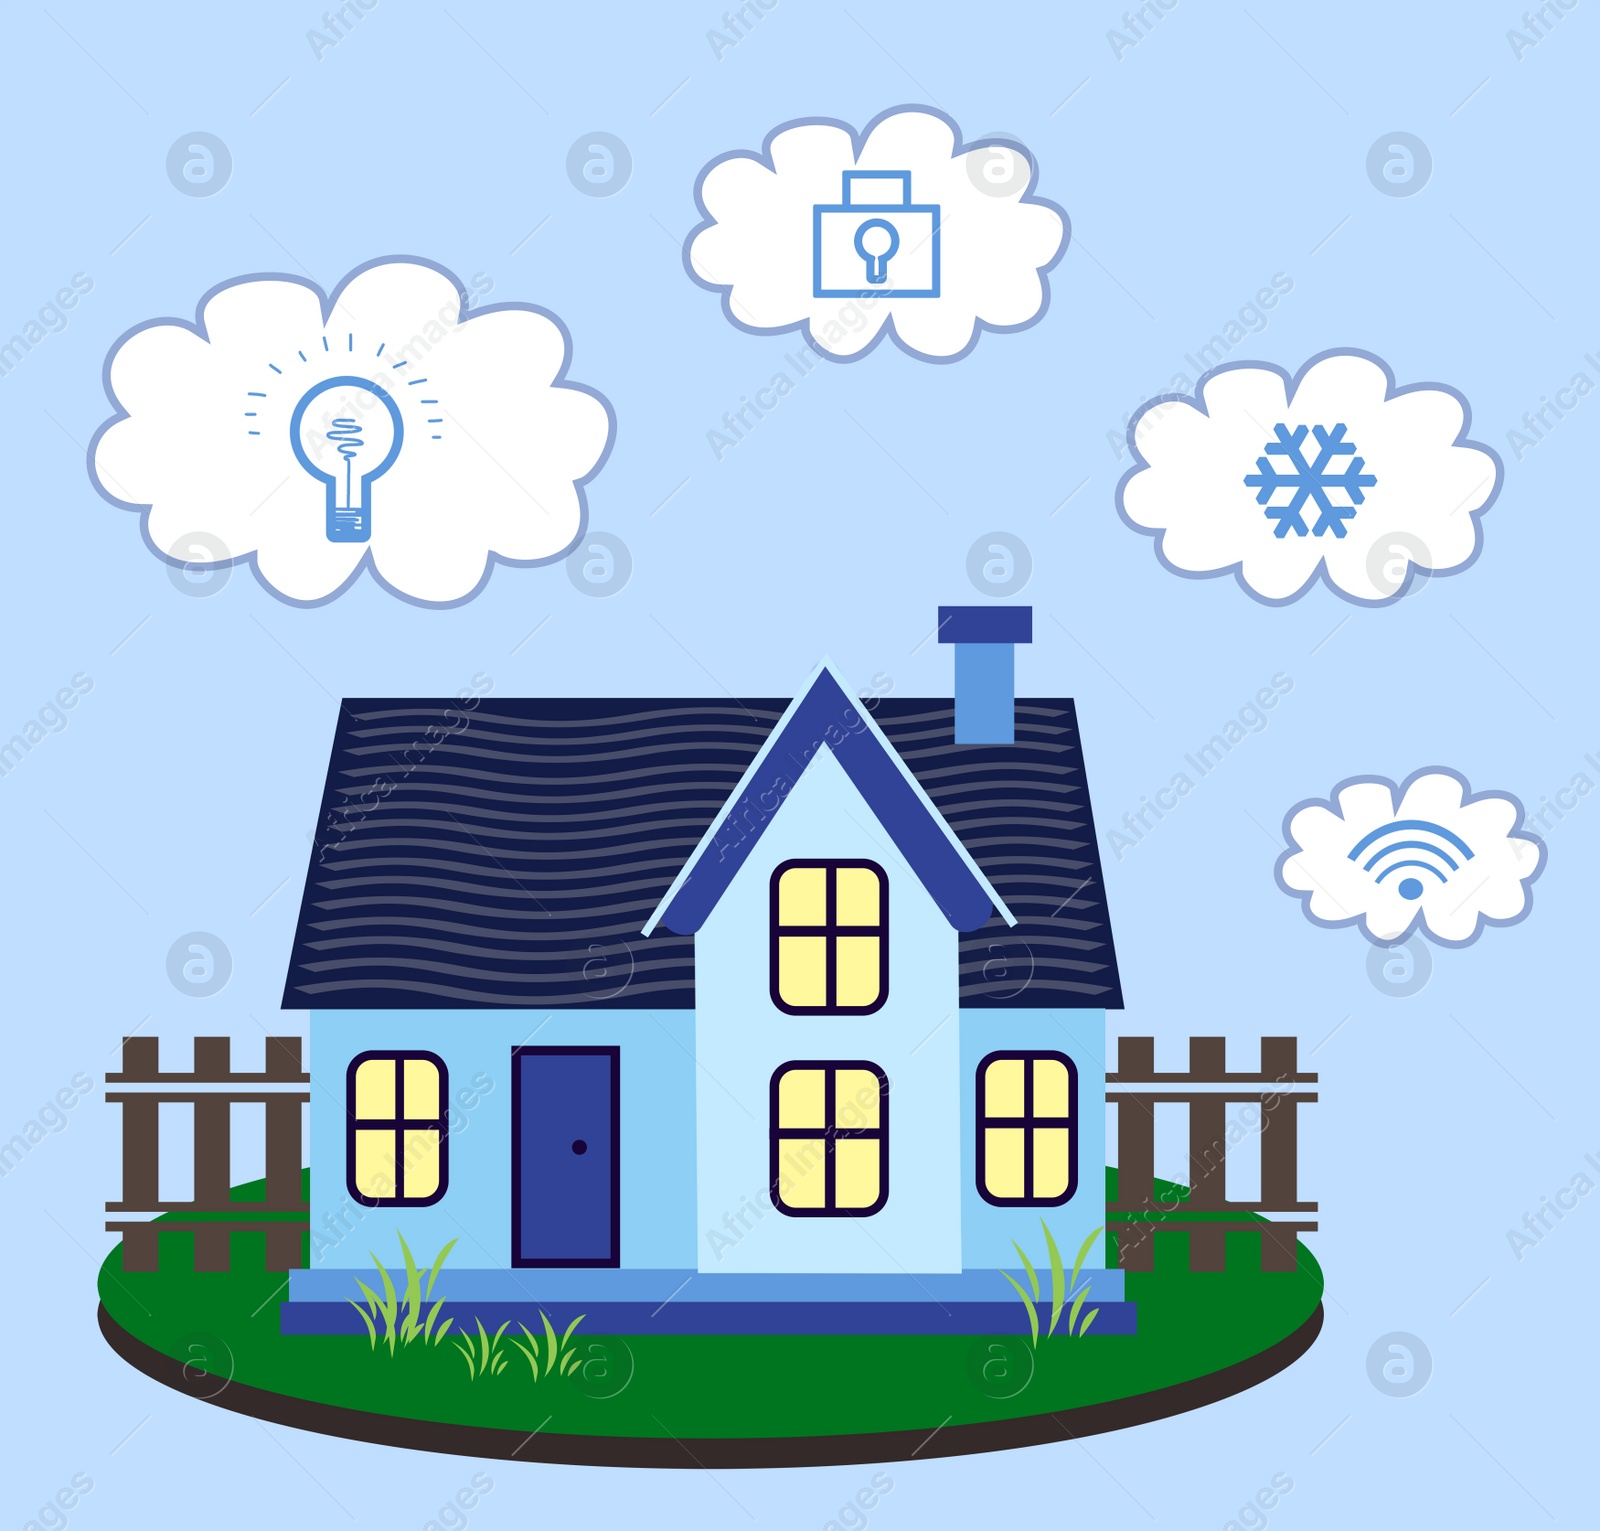 Image of Illustration of smart home technology with automatic systems and icons on light blue background